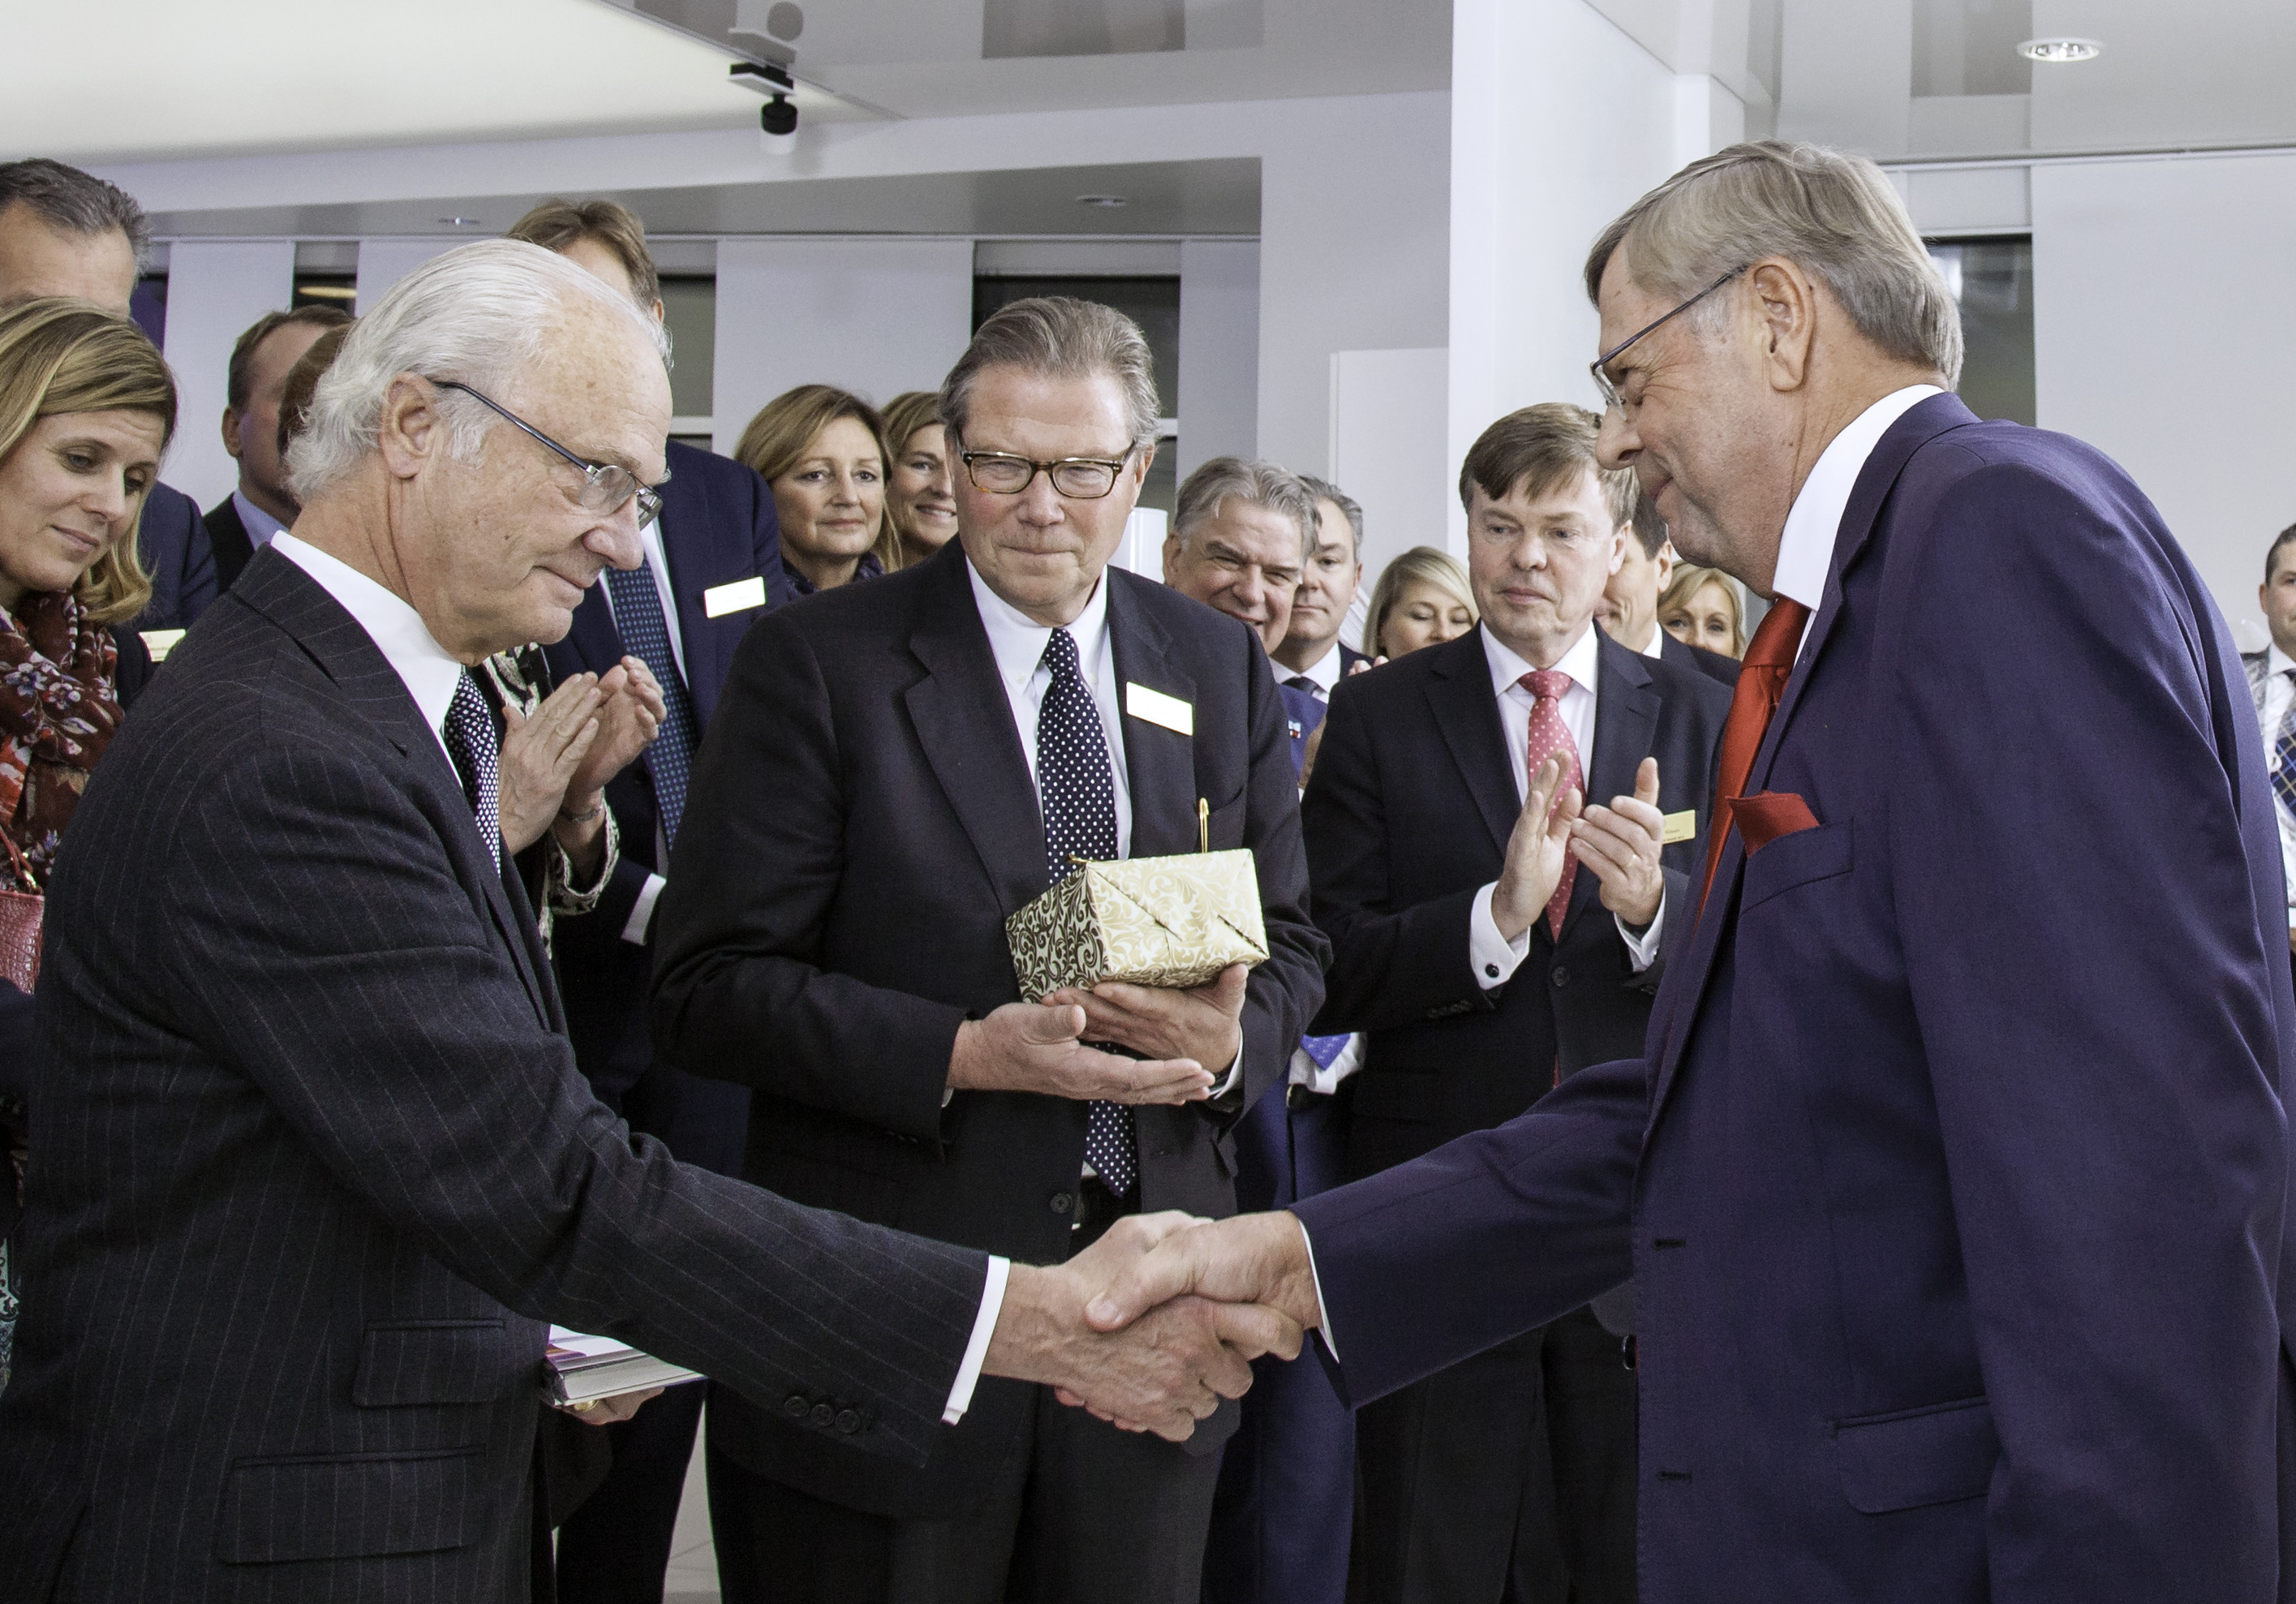 Royal Technology Mission with His Majesty King Carl XVI Gustaf of Sweden visits Planmeca